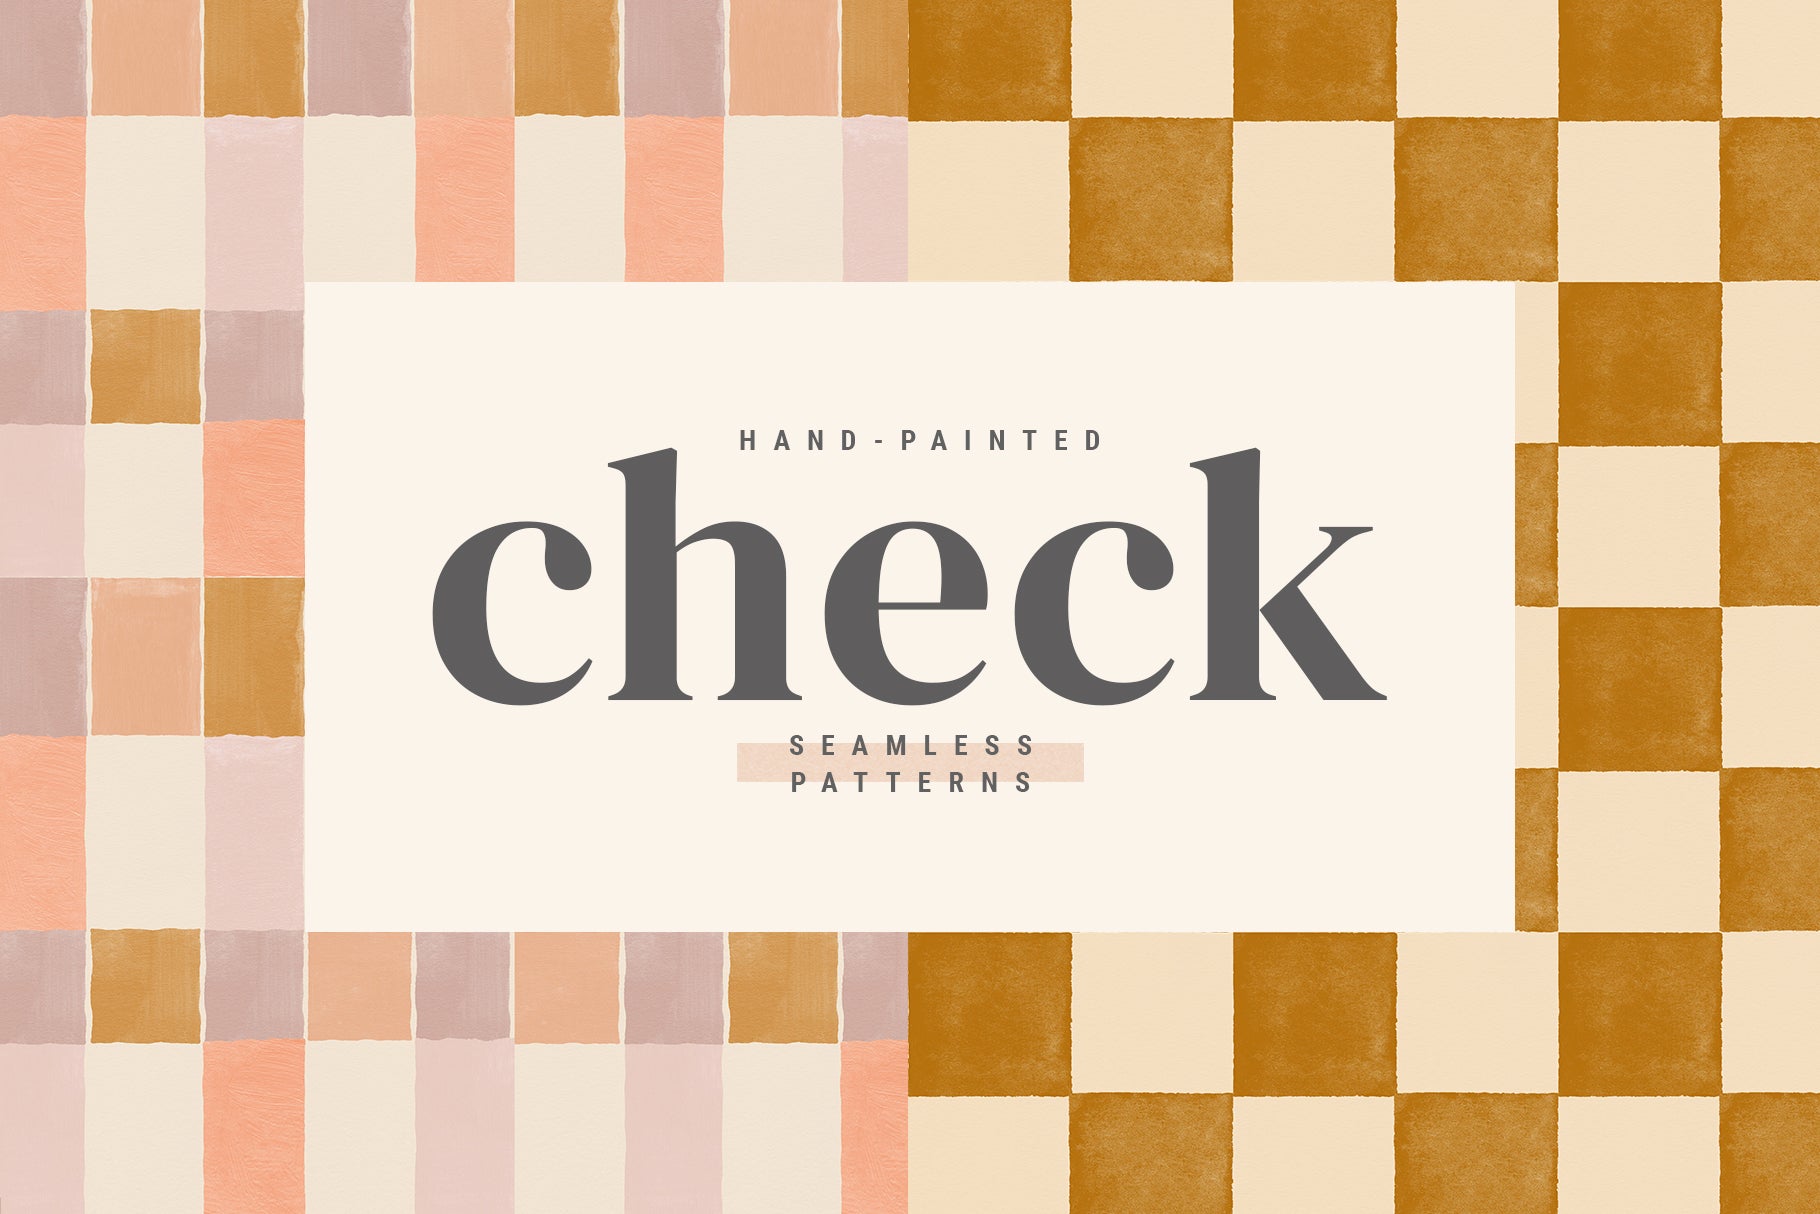 retro hand painted checkered pattern with title box in the center